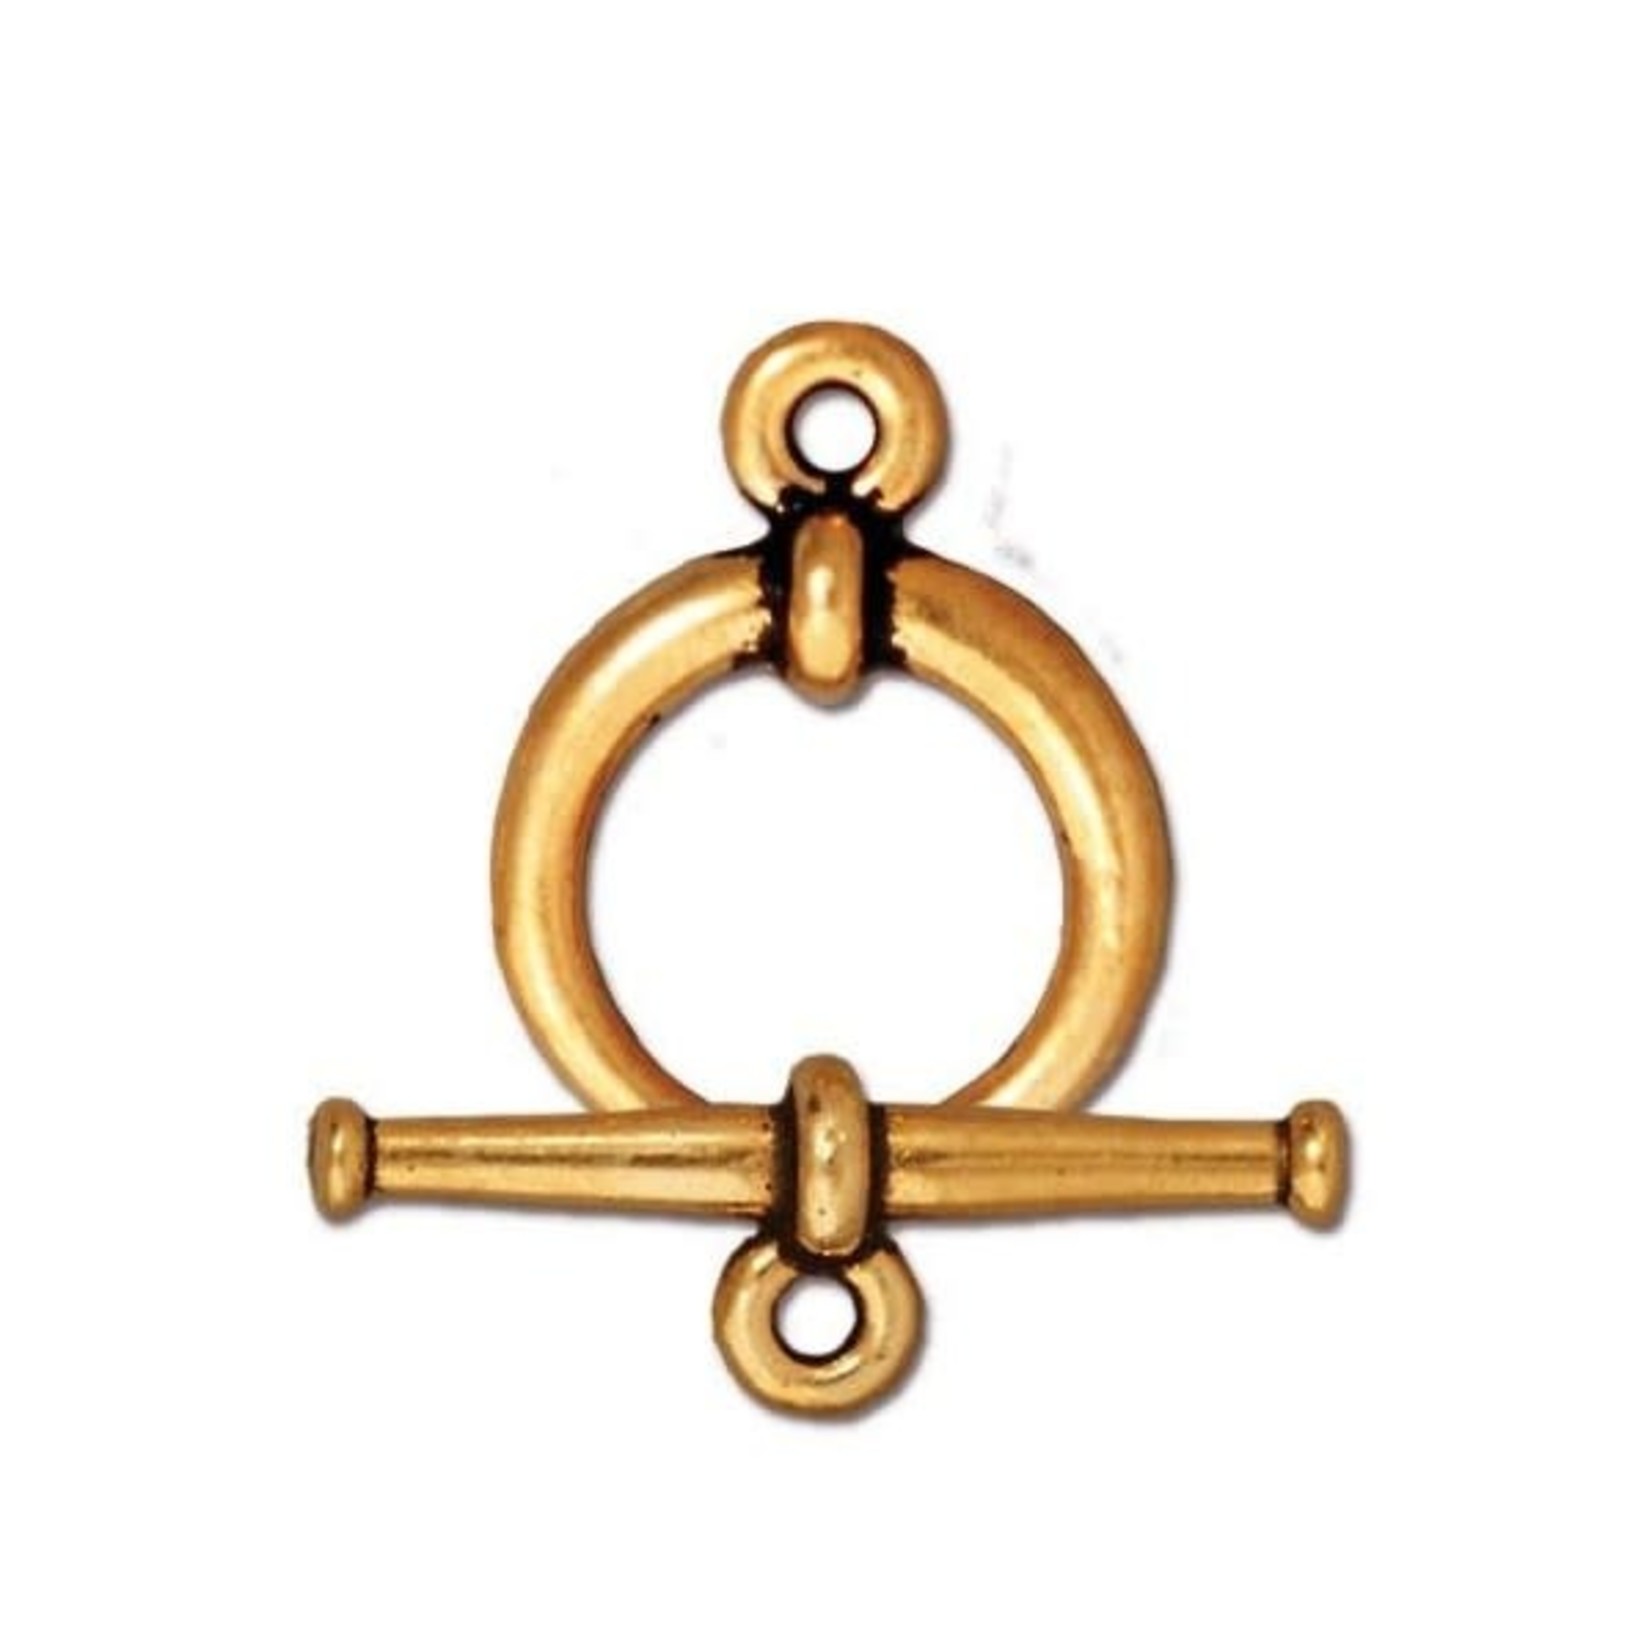 TierraCast Tapered Large Toggle Clasp Set - Antique Gold Plated